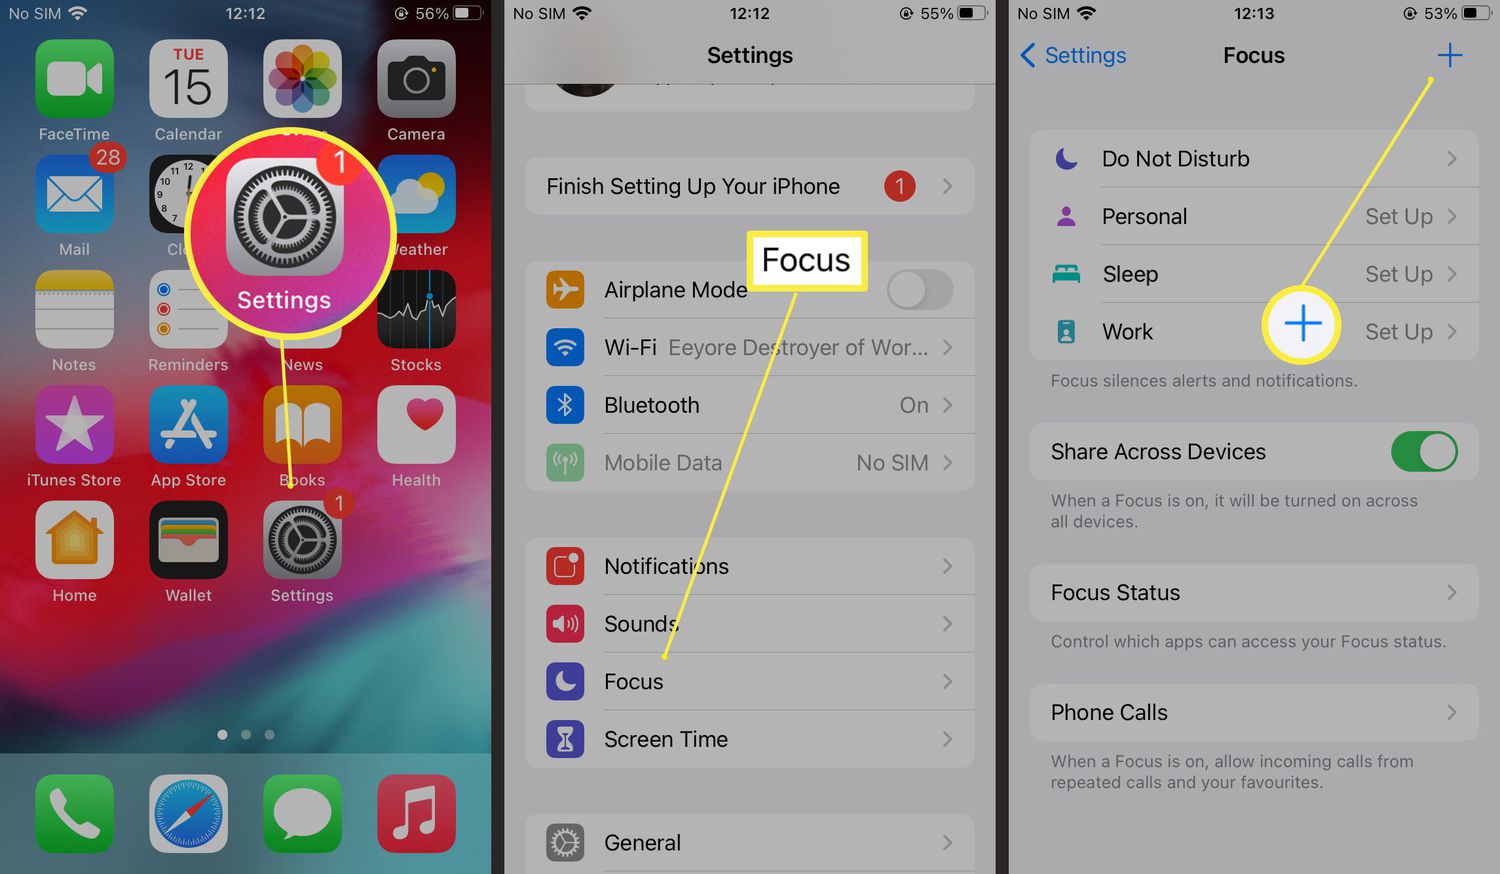 What is Share Focus Status on iPhone Mean?